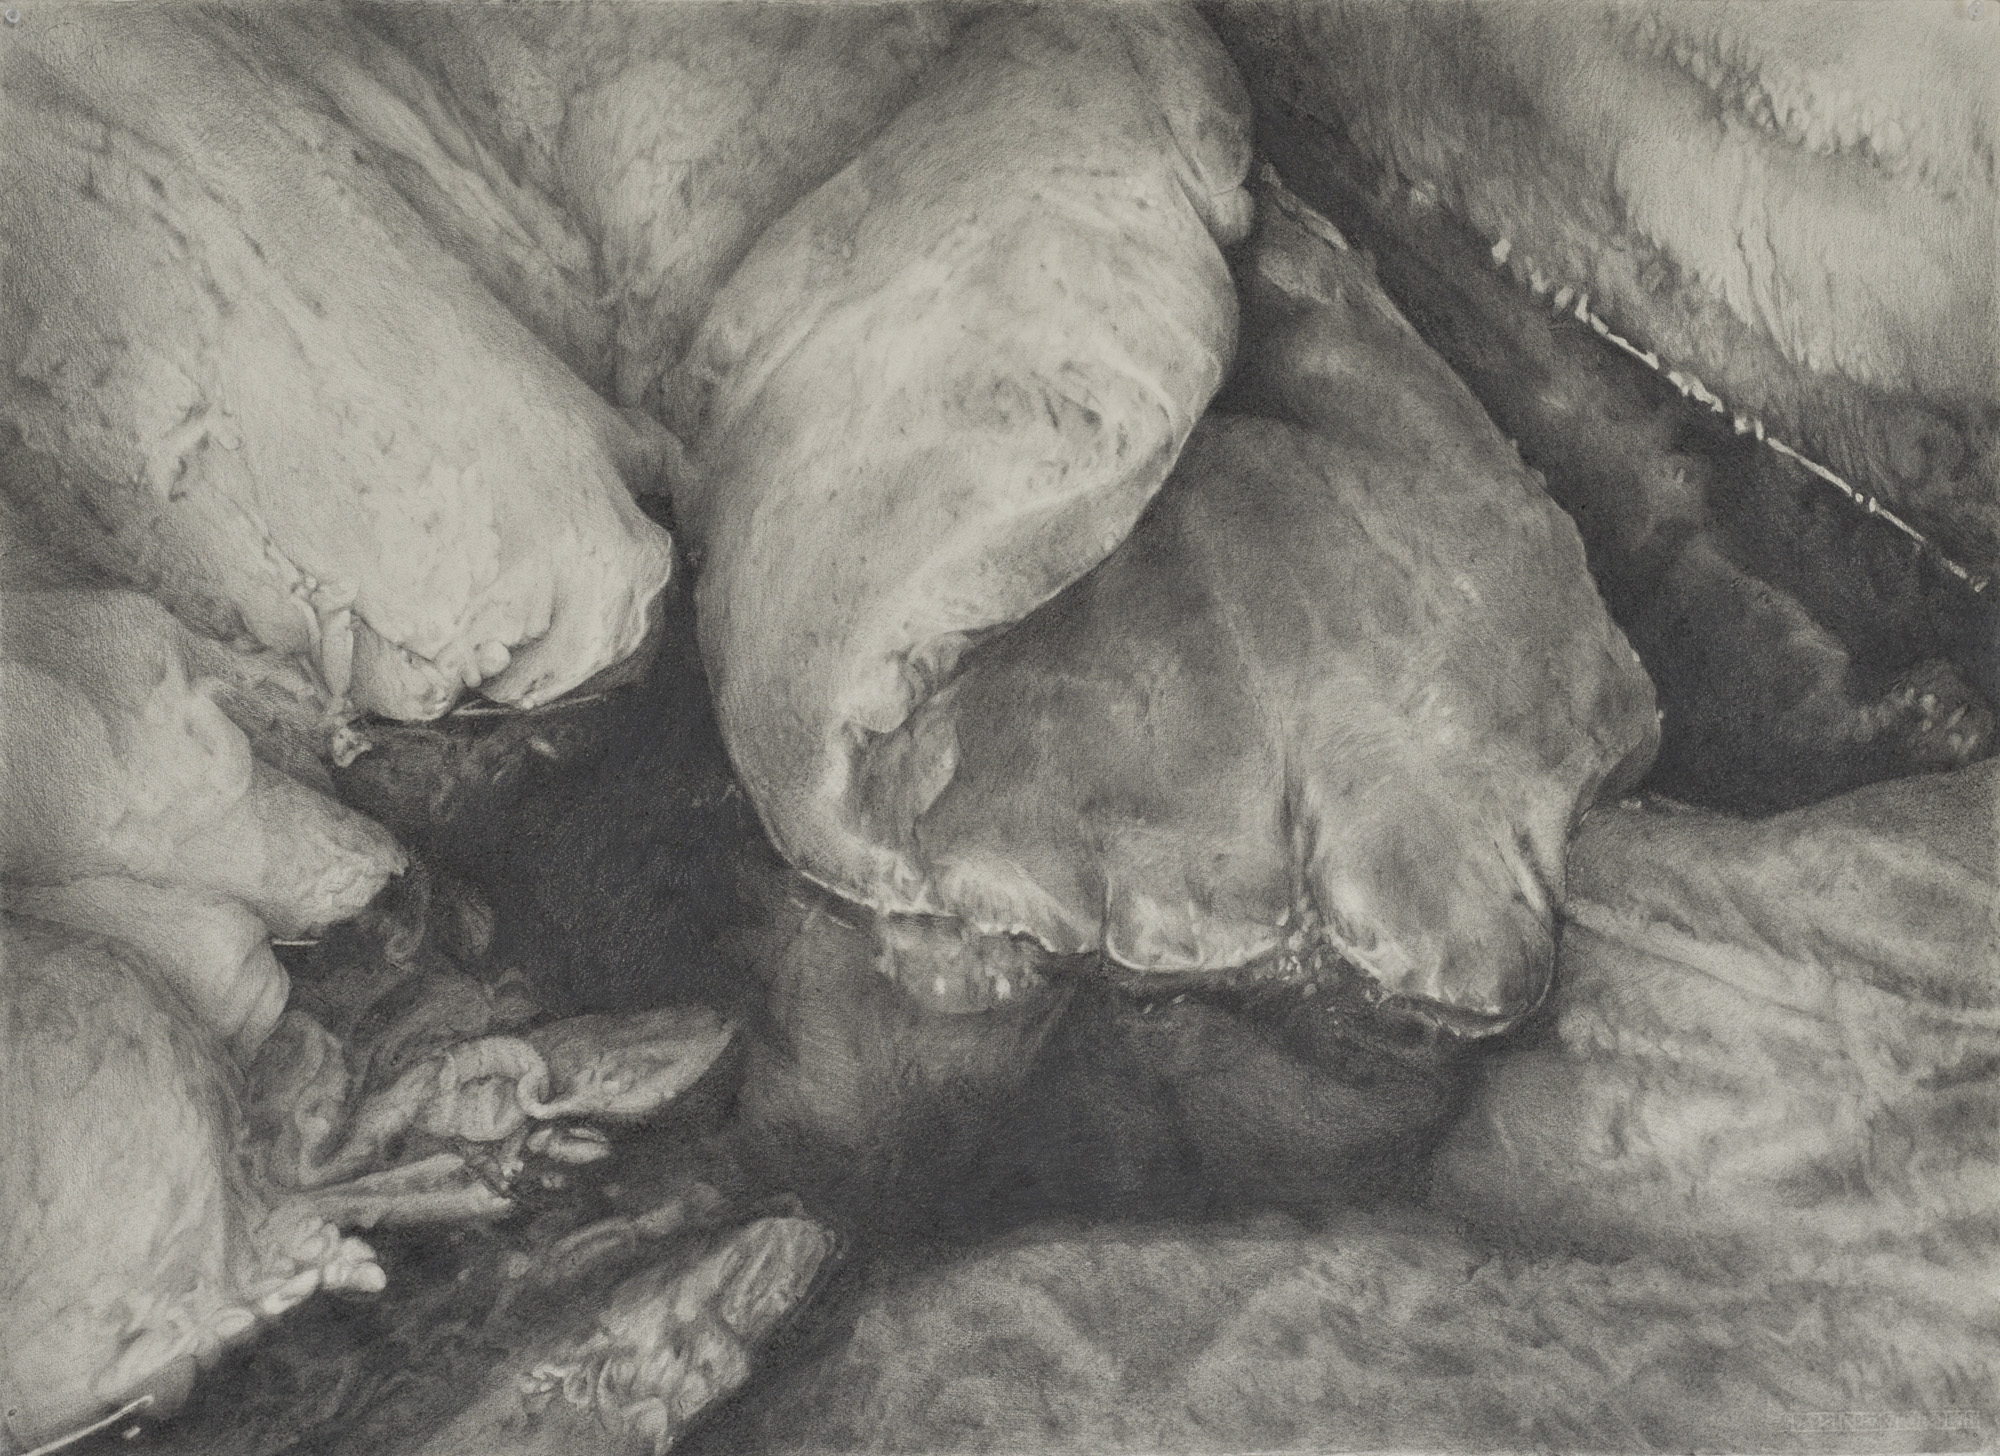  Inside the mouth of the Baleshare Sperm Whale, 2013-14   Graphite on Hahnemuhle paper, 300gms, 78 x 106 cm                                                              Private collection   